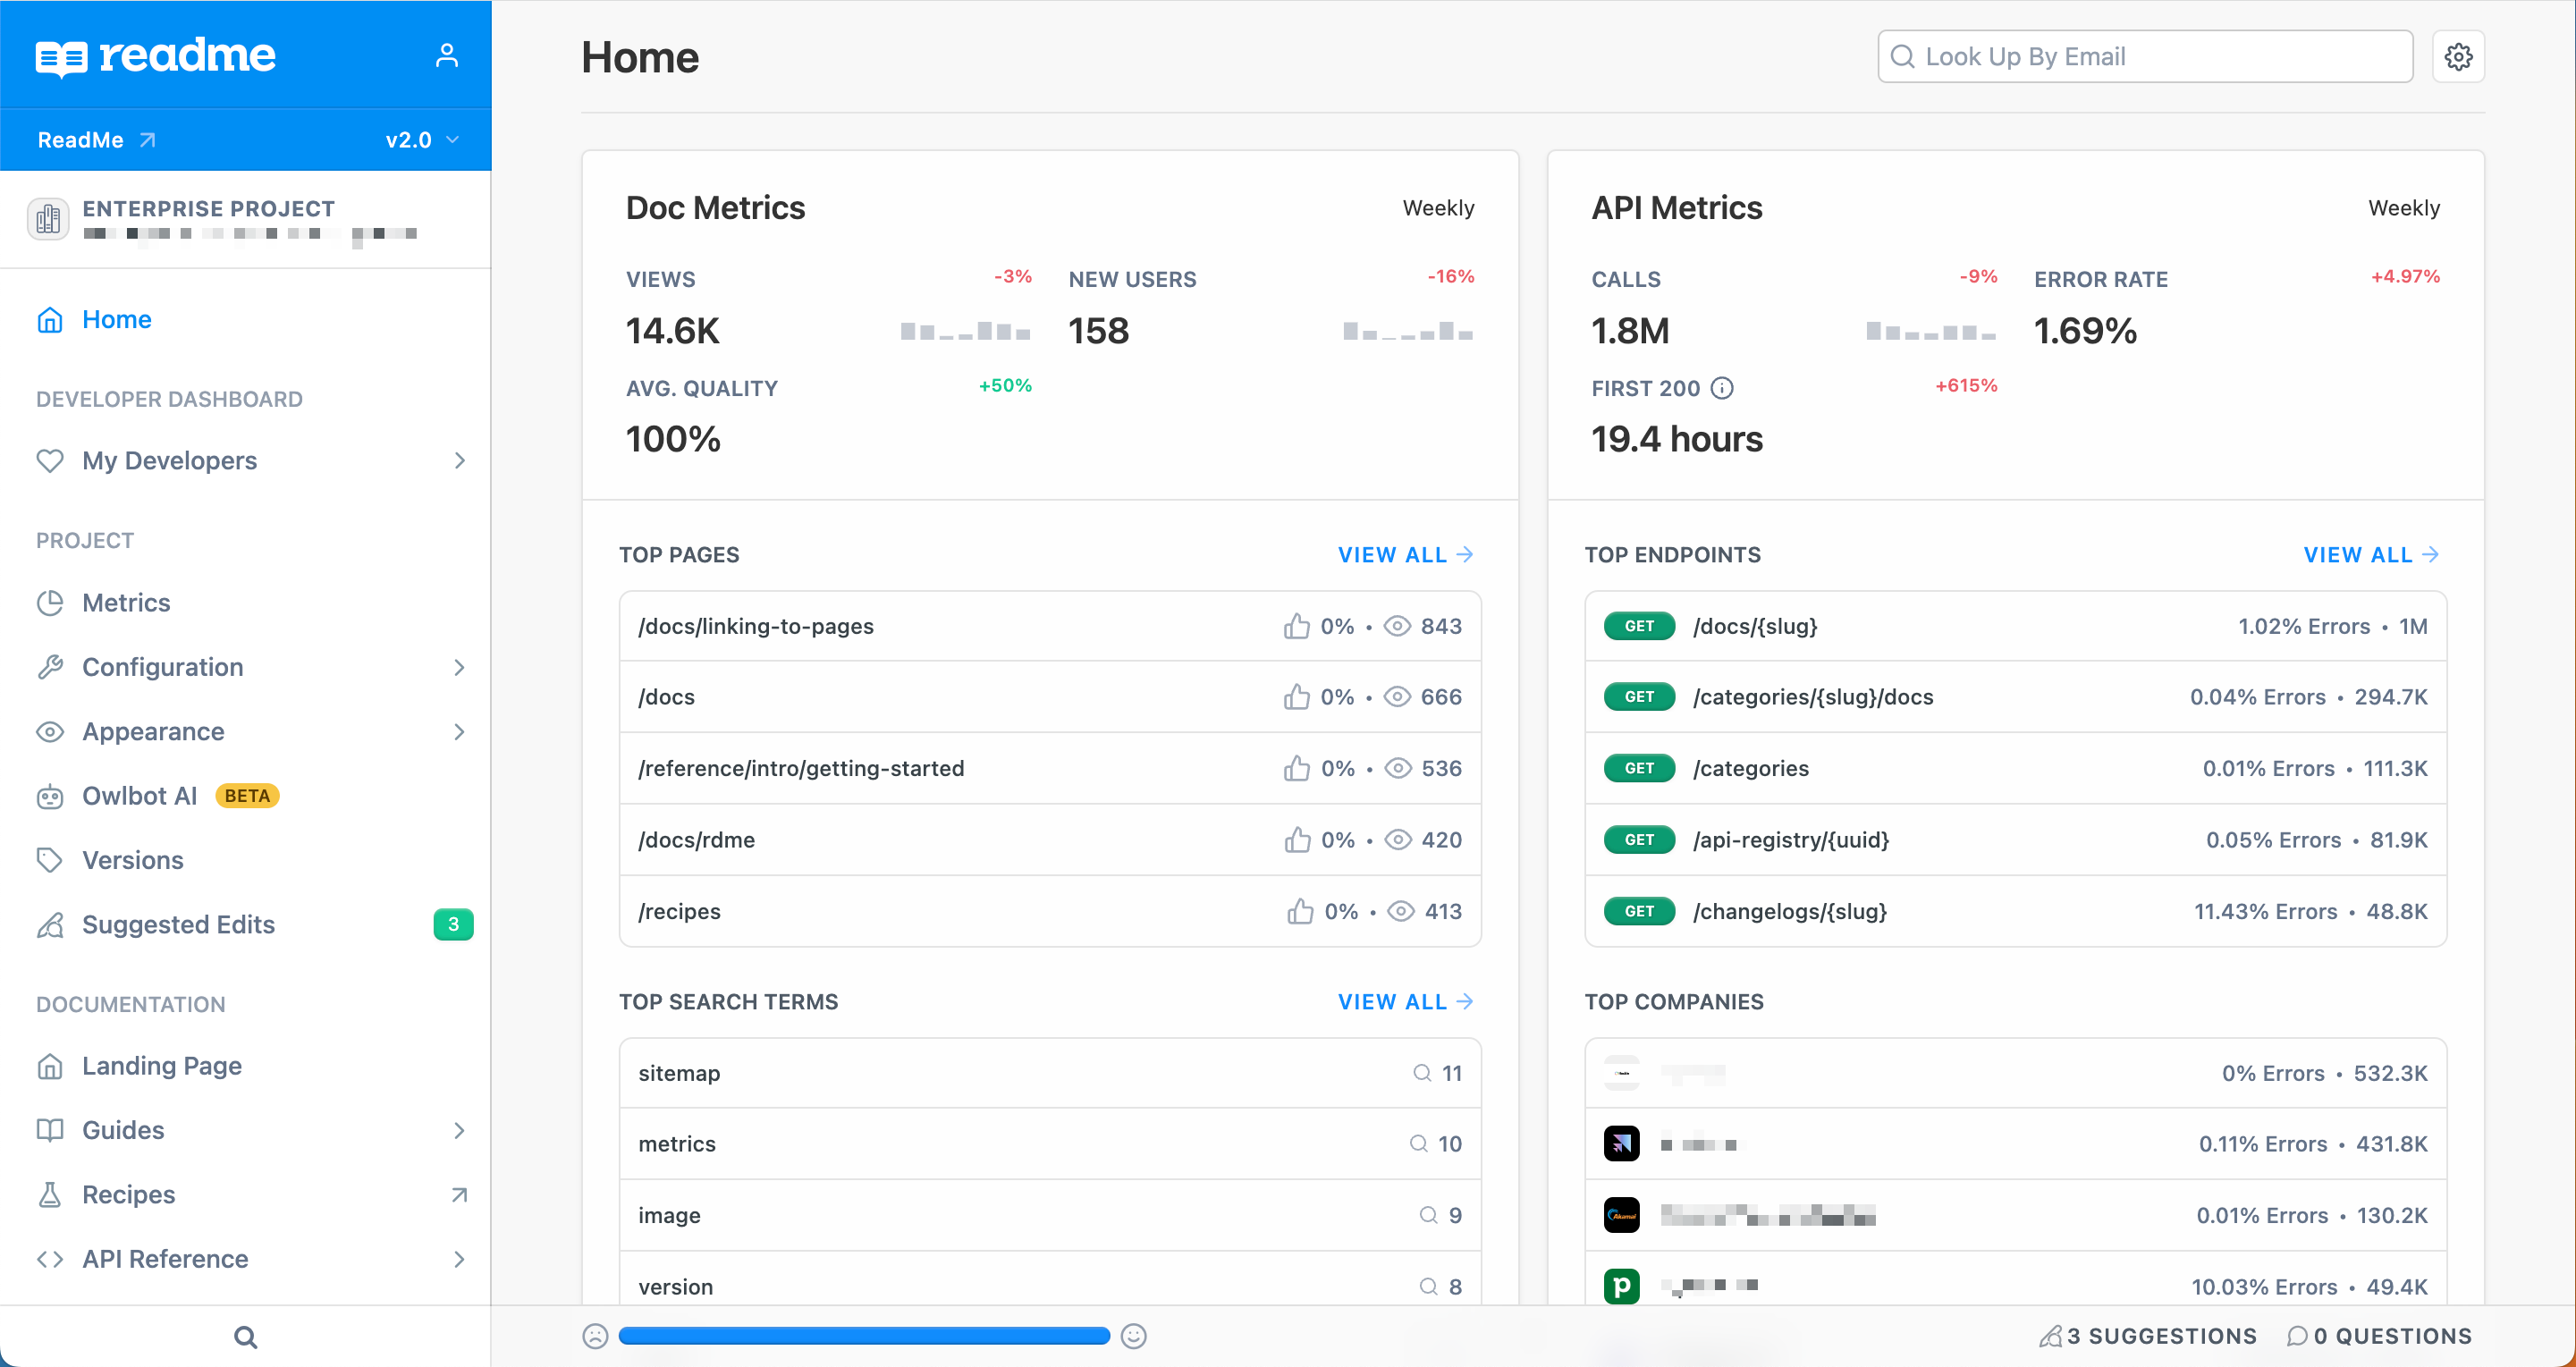 The Home page of your project dashboard highlights a snapshot of your Doc Metrics and API Metrics. Click View All to see more details, or navigate to the Metrics page in your project dashboard.